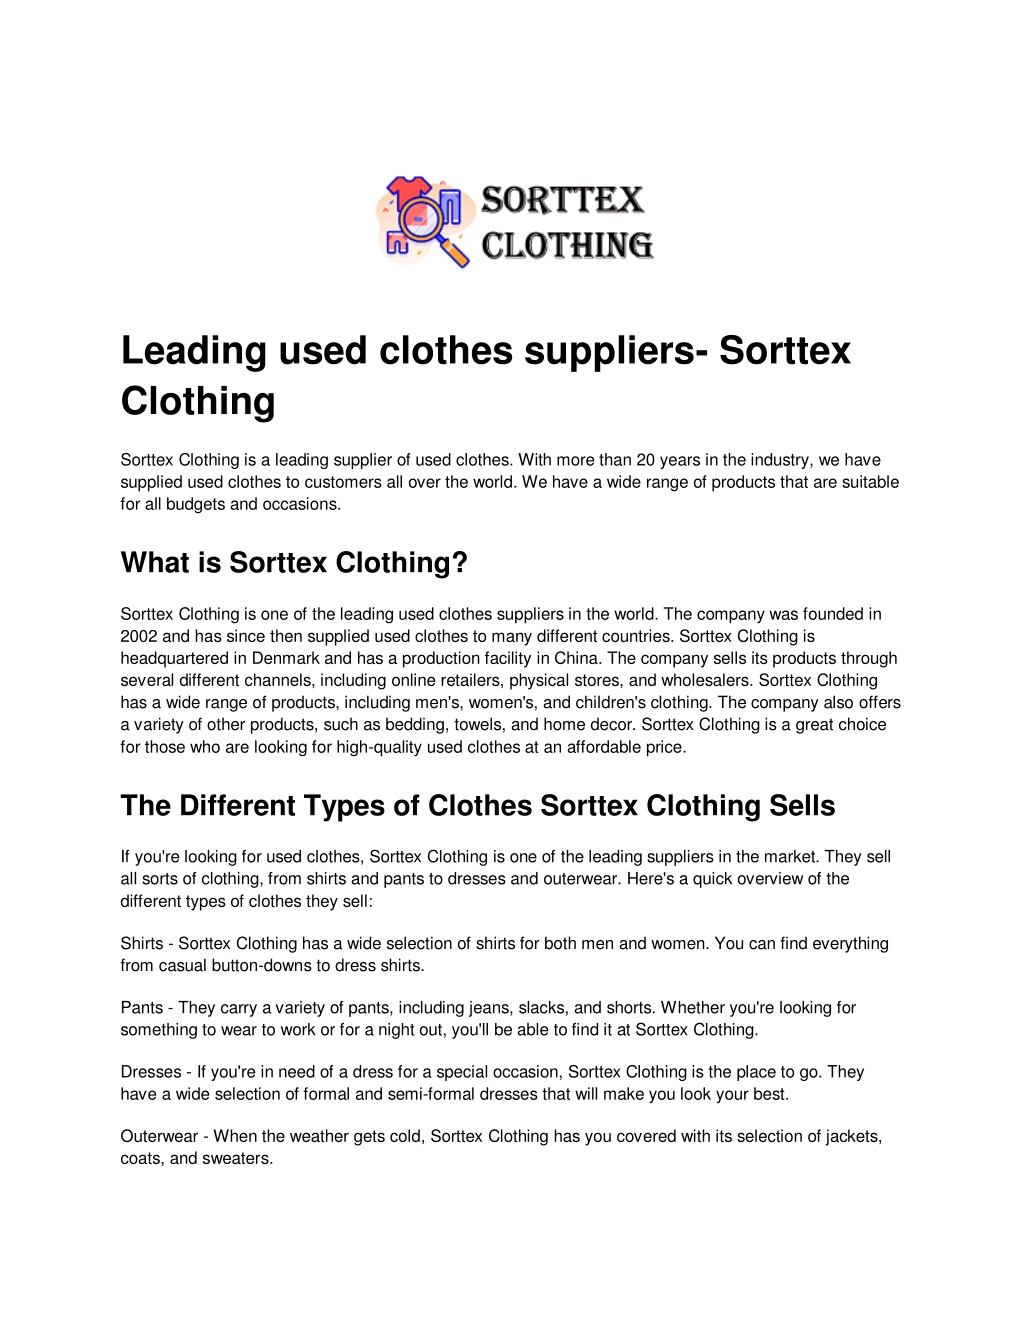 PPT - Best Used Clothes Suppliers PowerPoint Presentation, free download -  ID:11608820